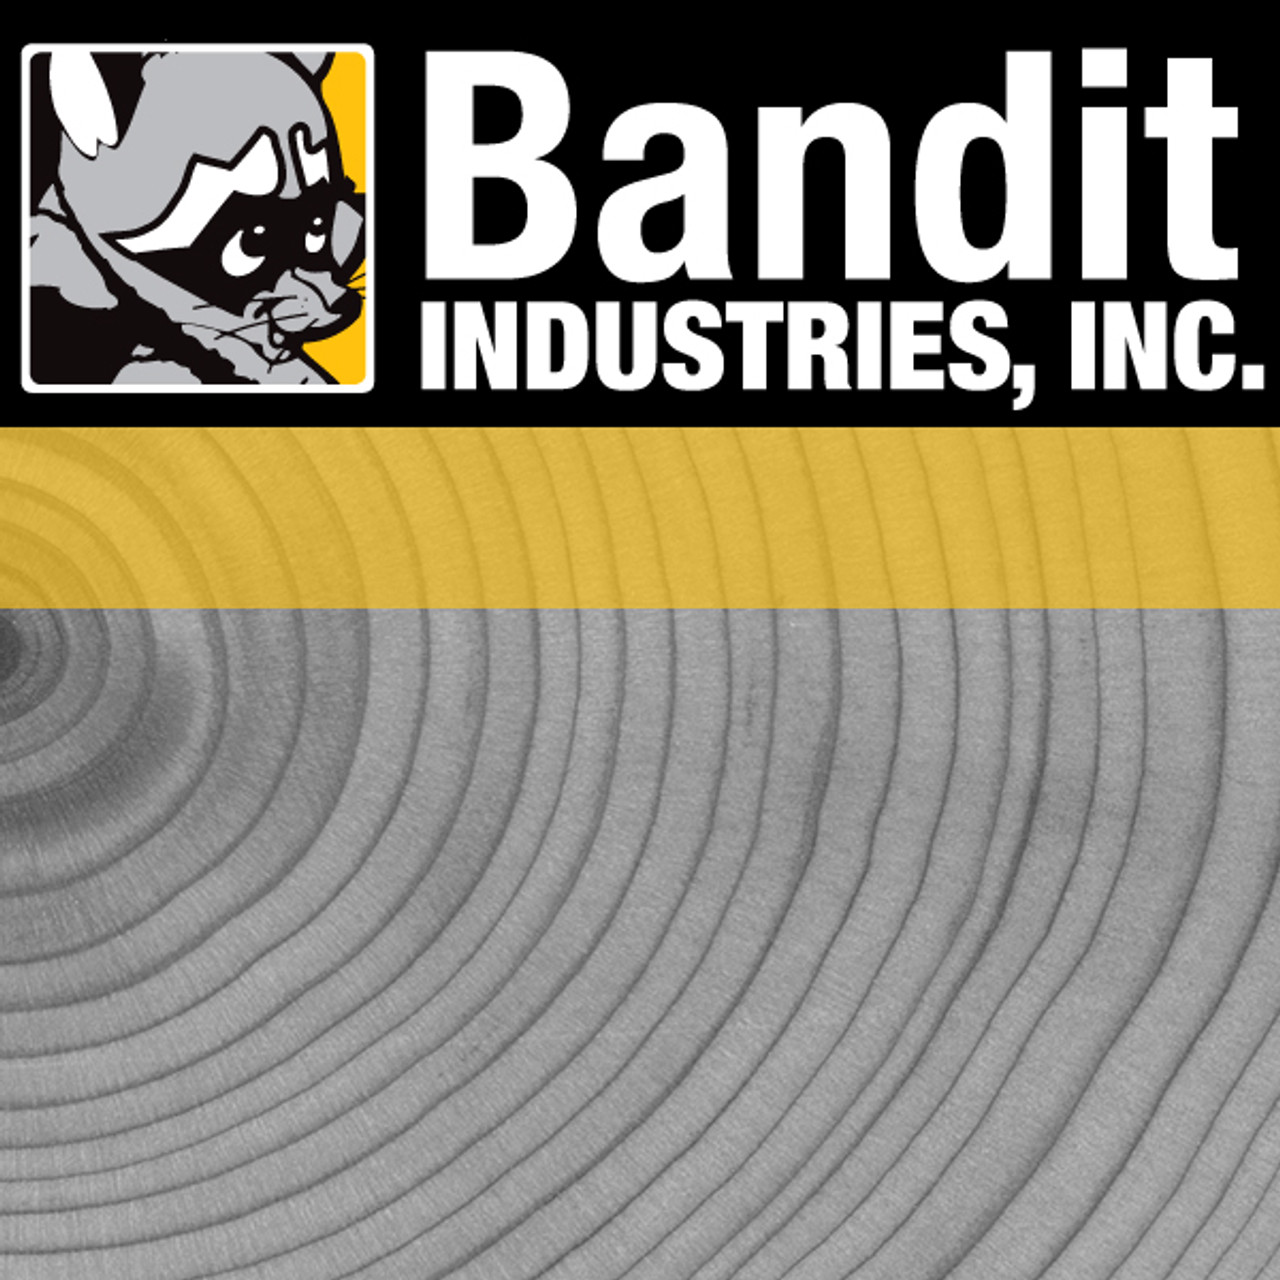 900-6920-06: BANDIT END CAP FOR ENGINAIRE 2.5"" AIR CLEANER